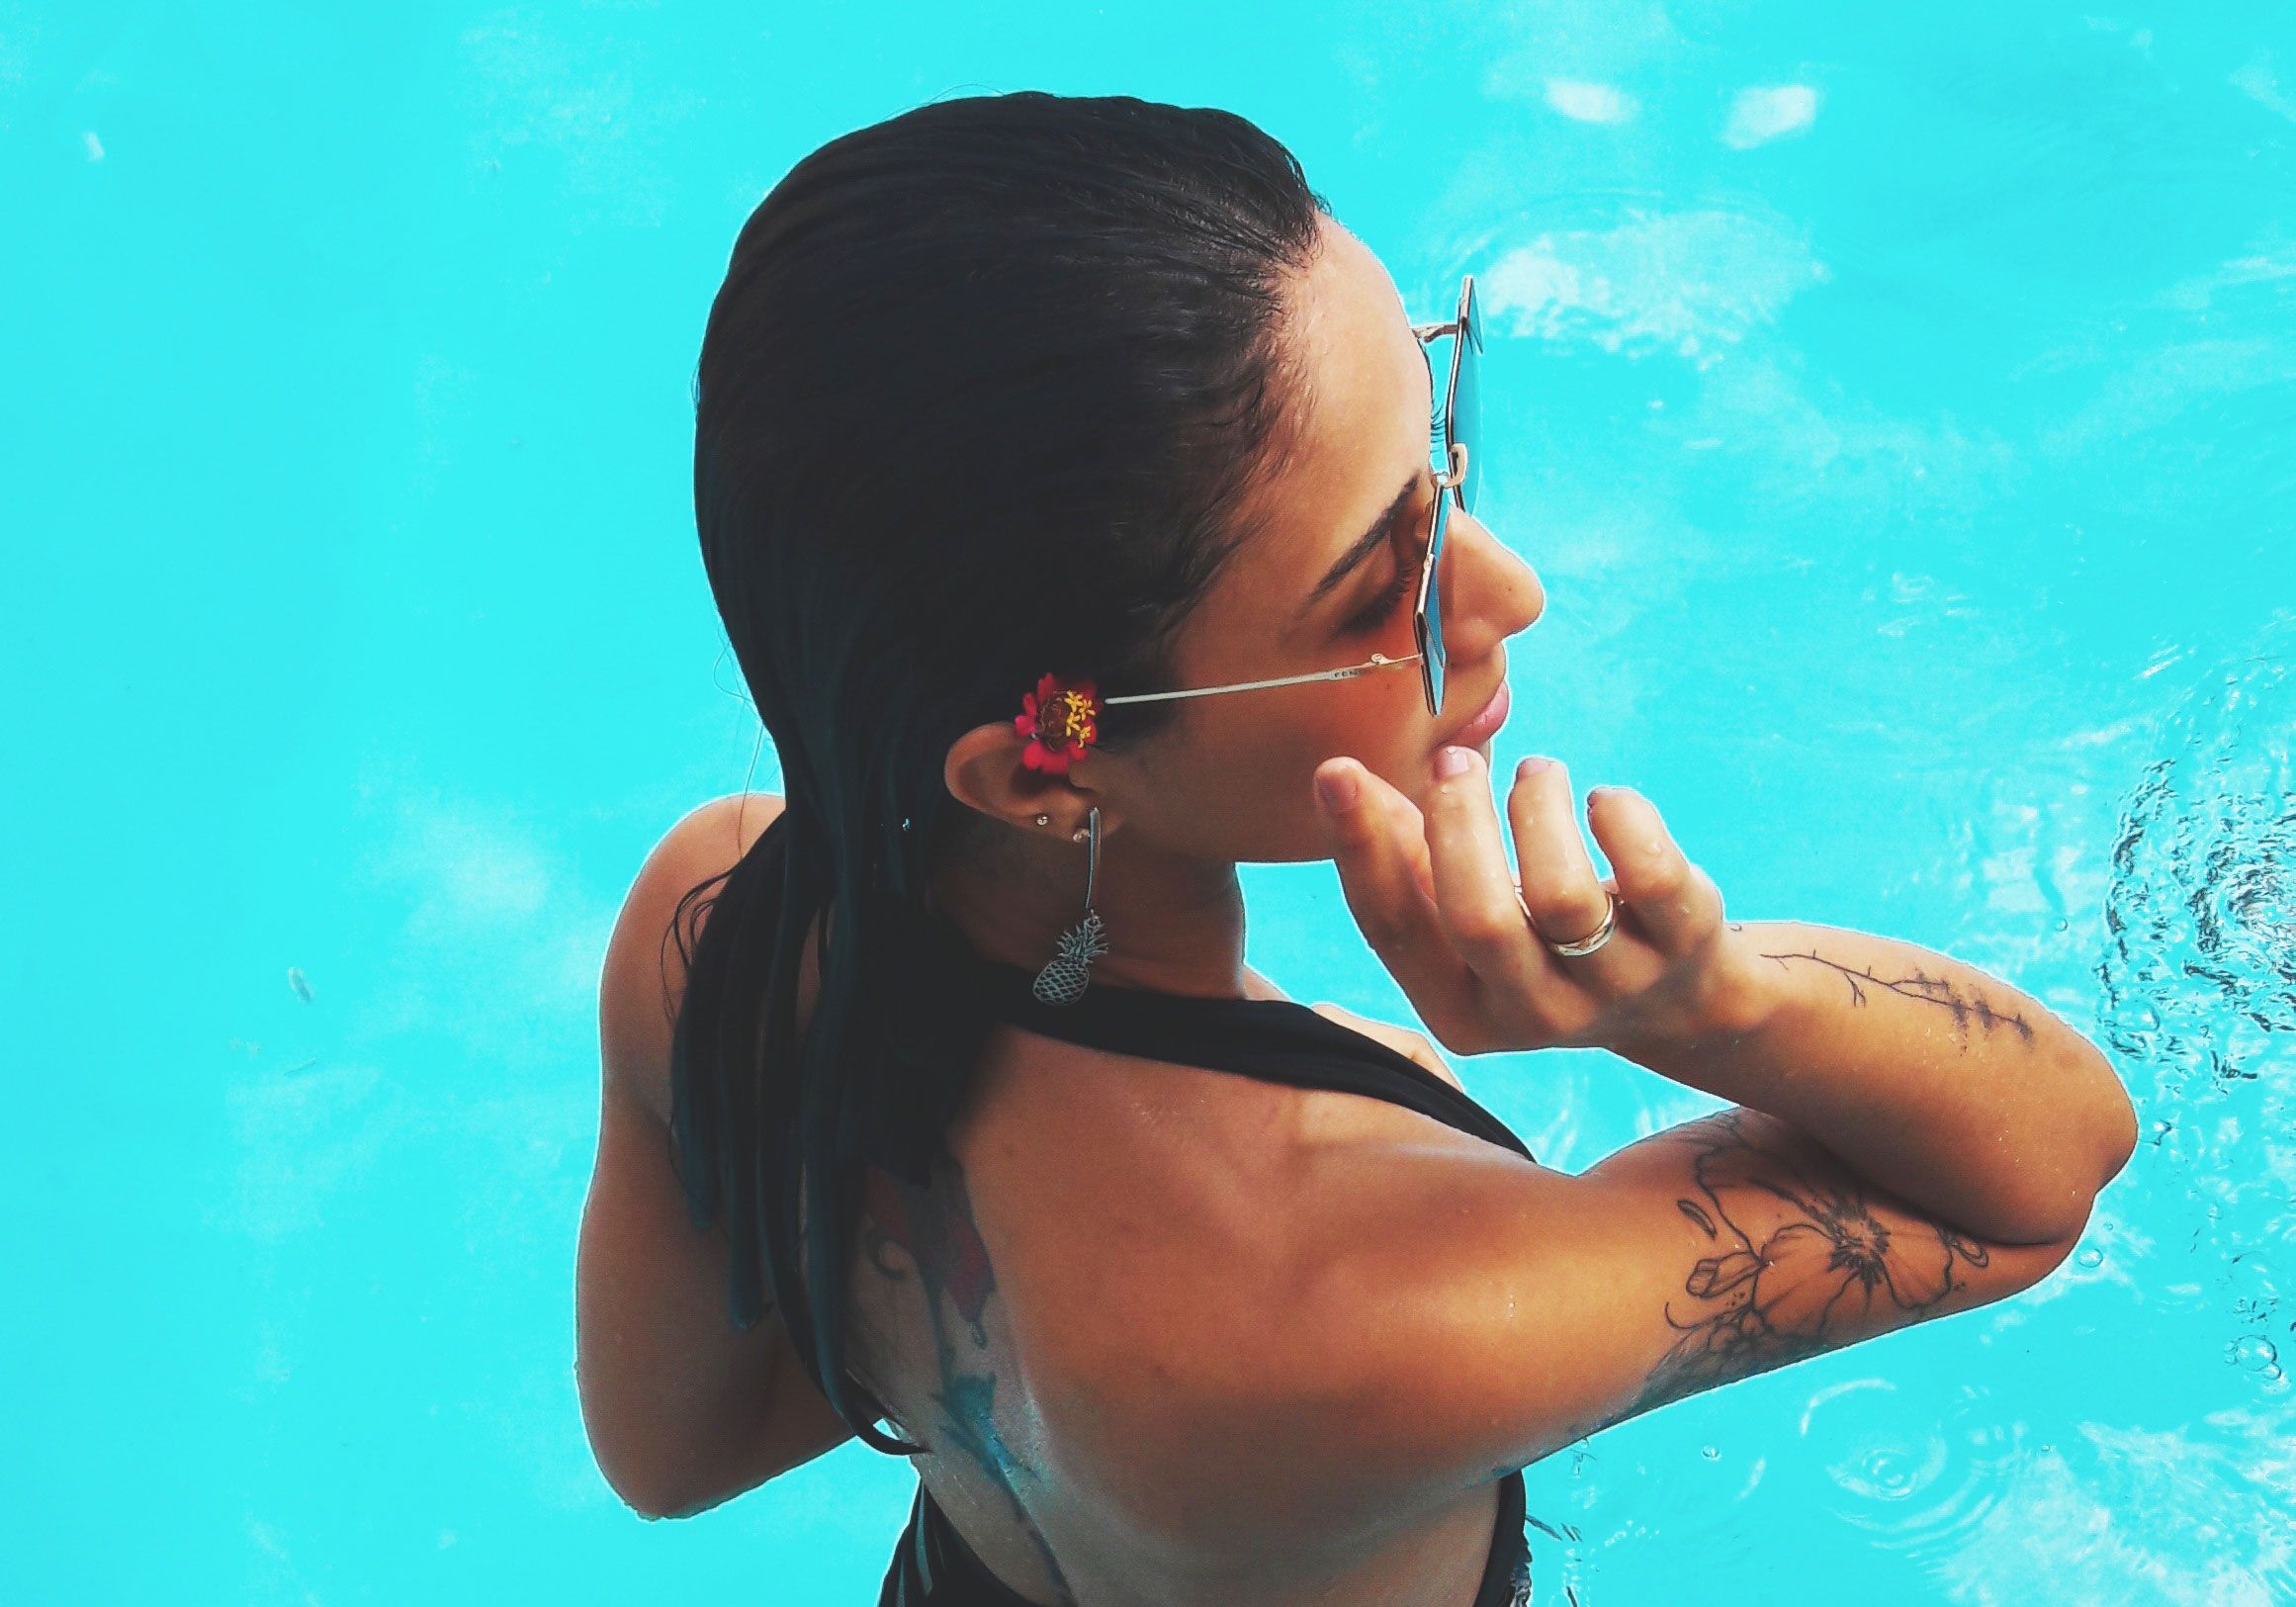 When can i swim after getting a tattoo